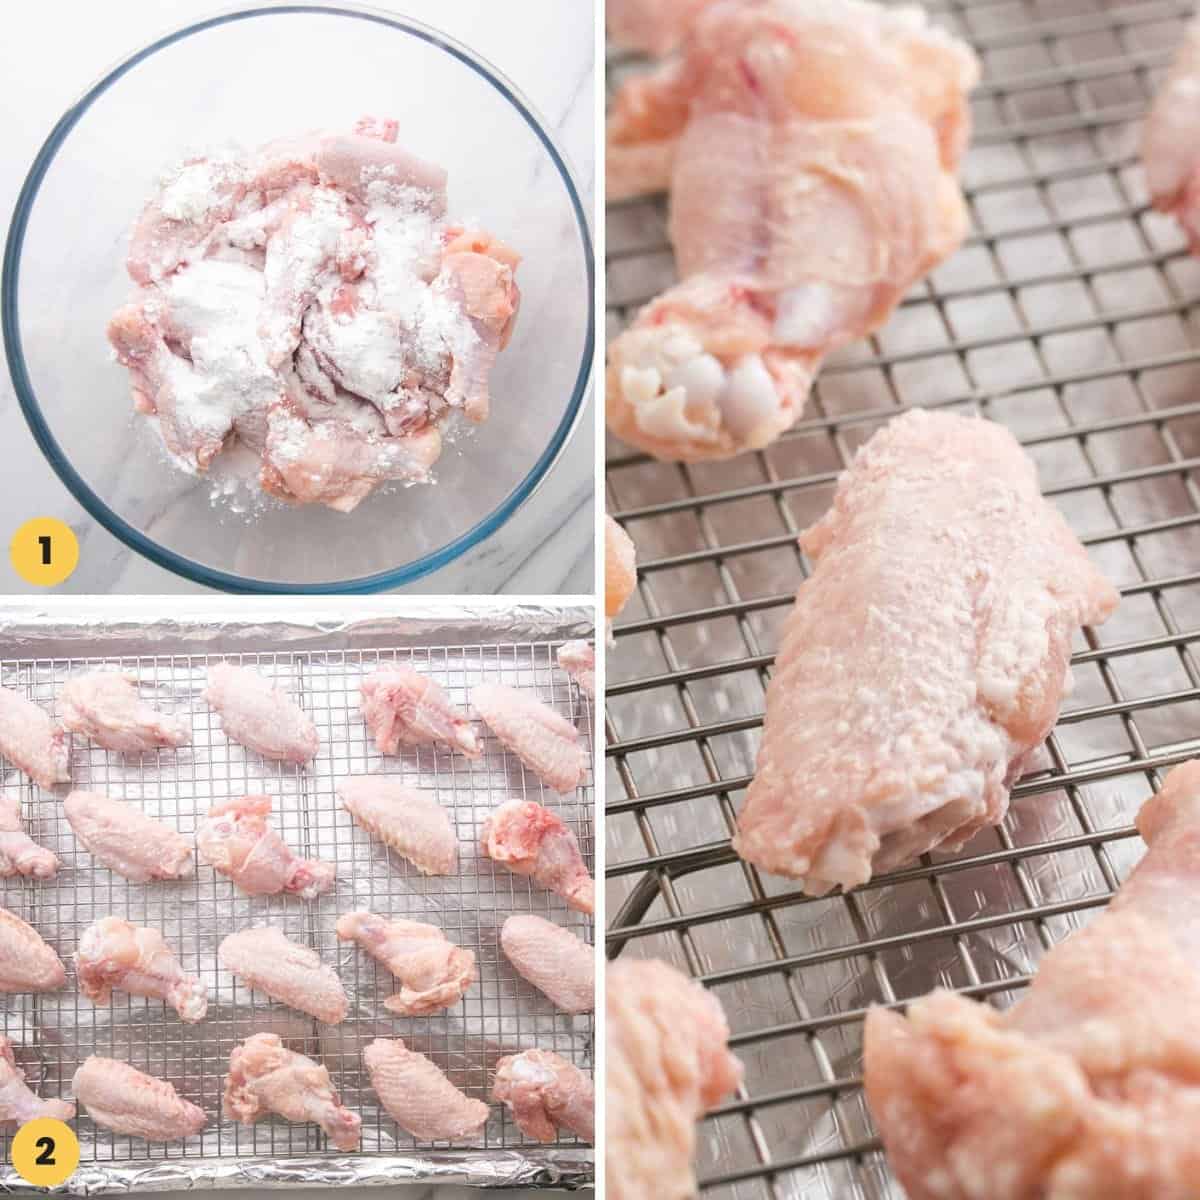 A collage of three images showing how to prepare wings for baking by dredging them in cornstarch and baking powder